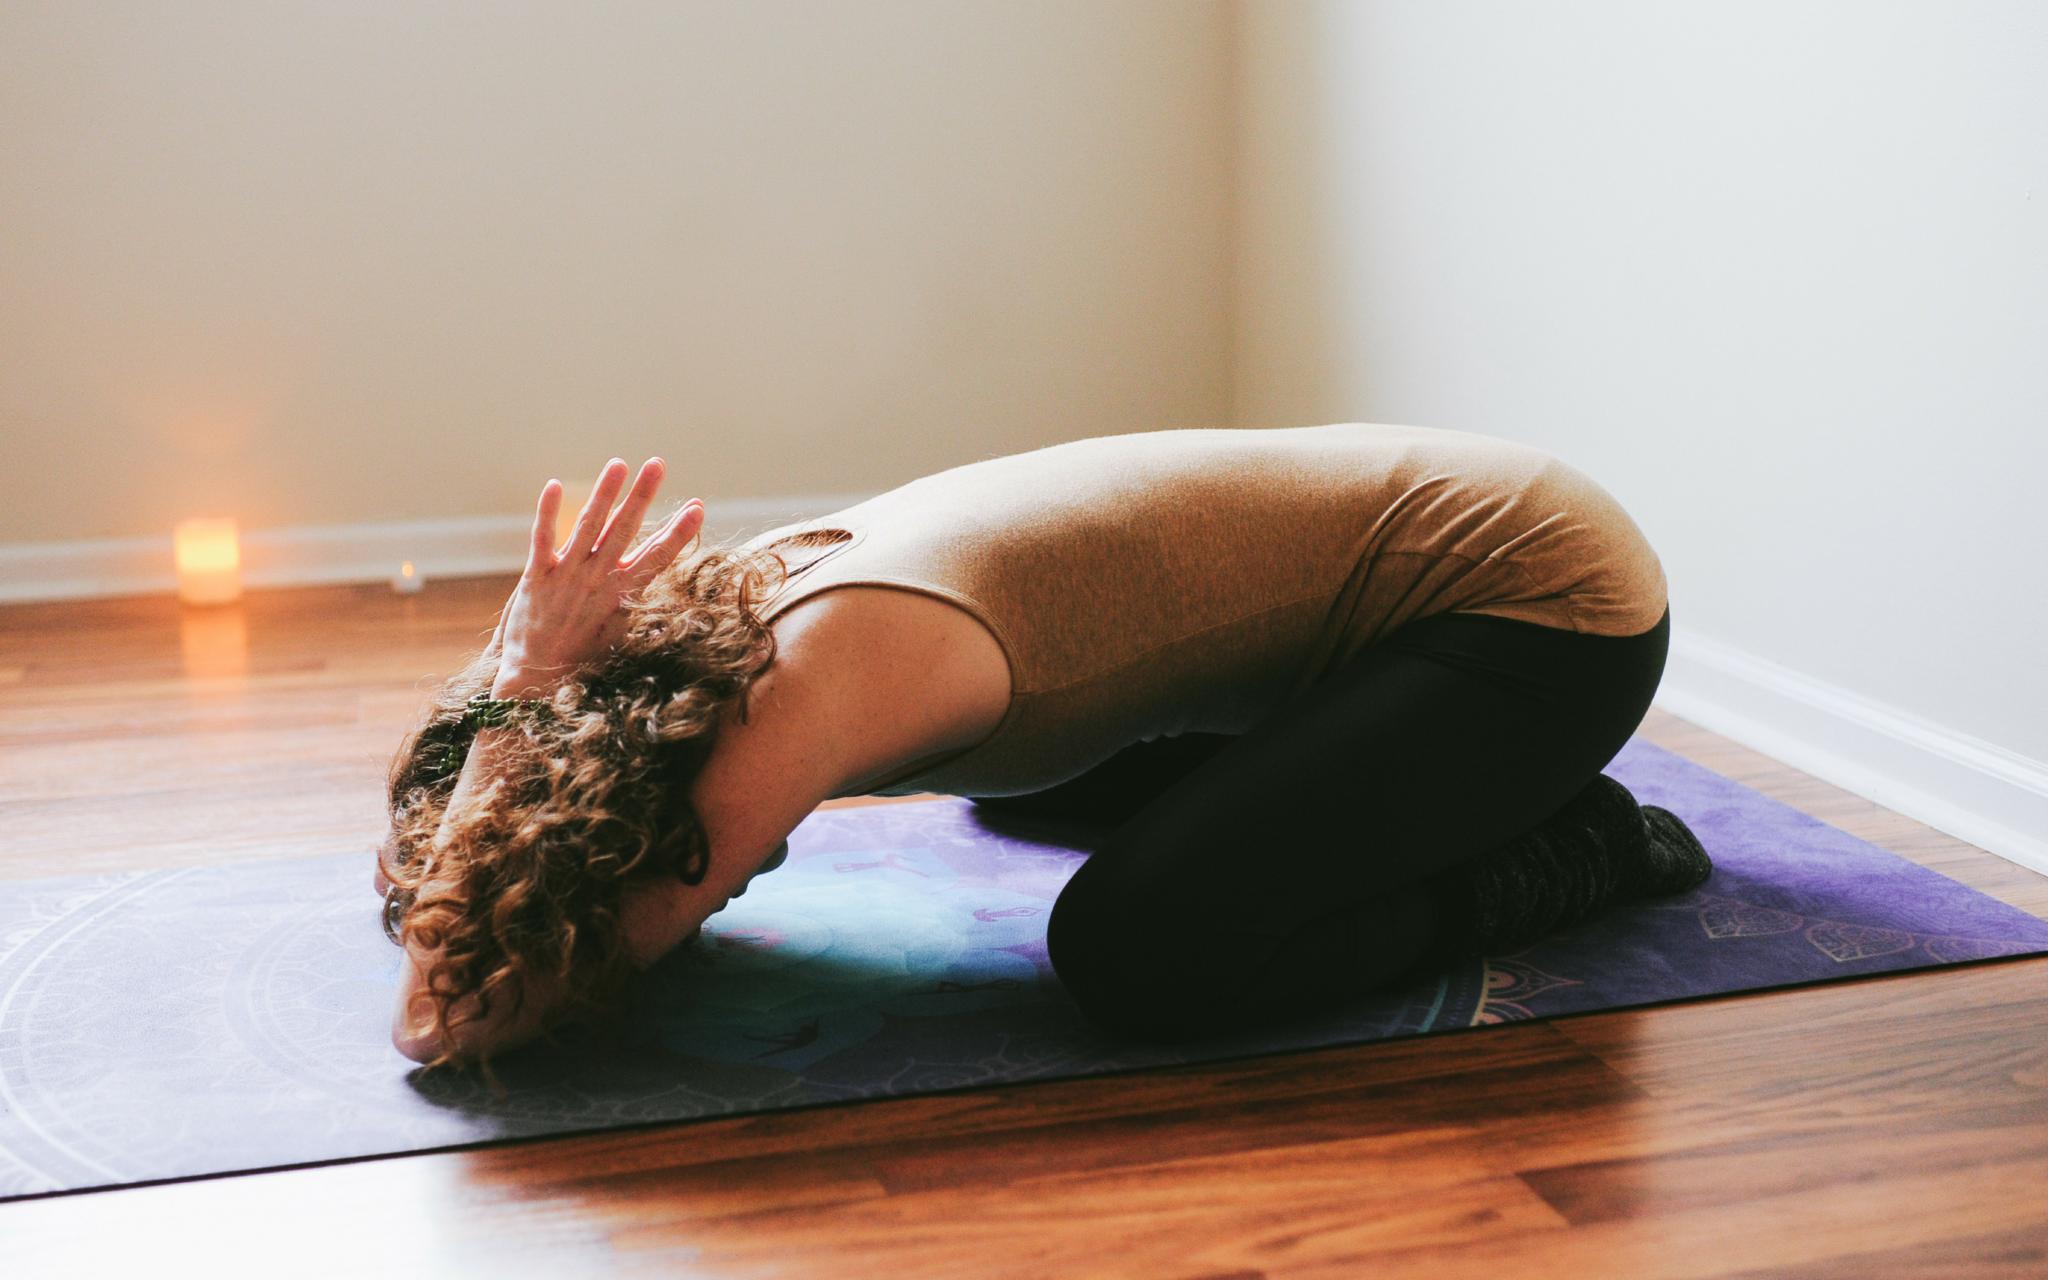 5 Yin Yoga Poses To Relieve Stress